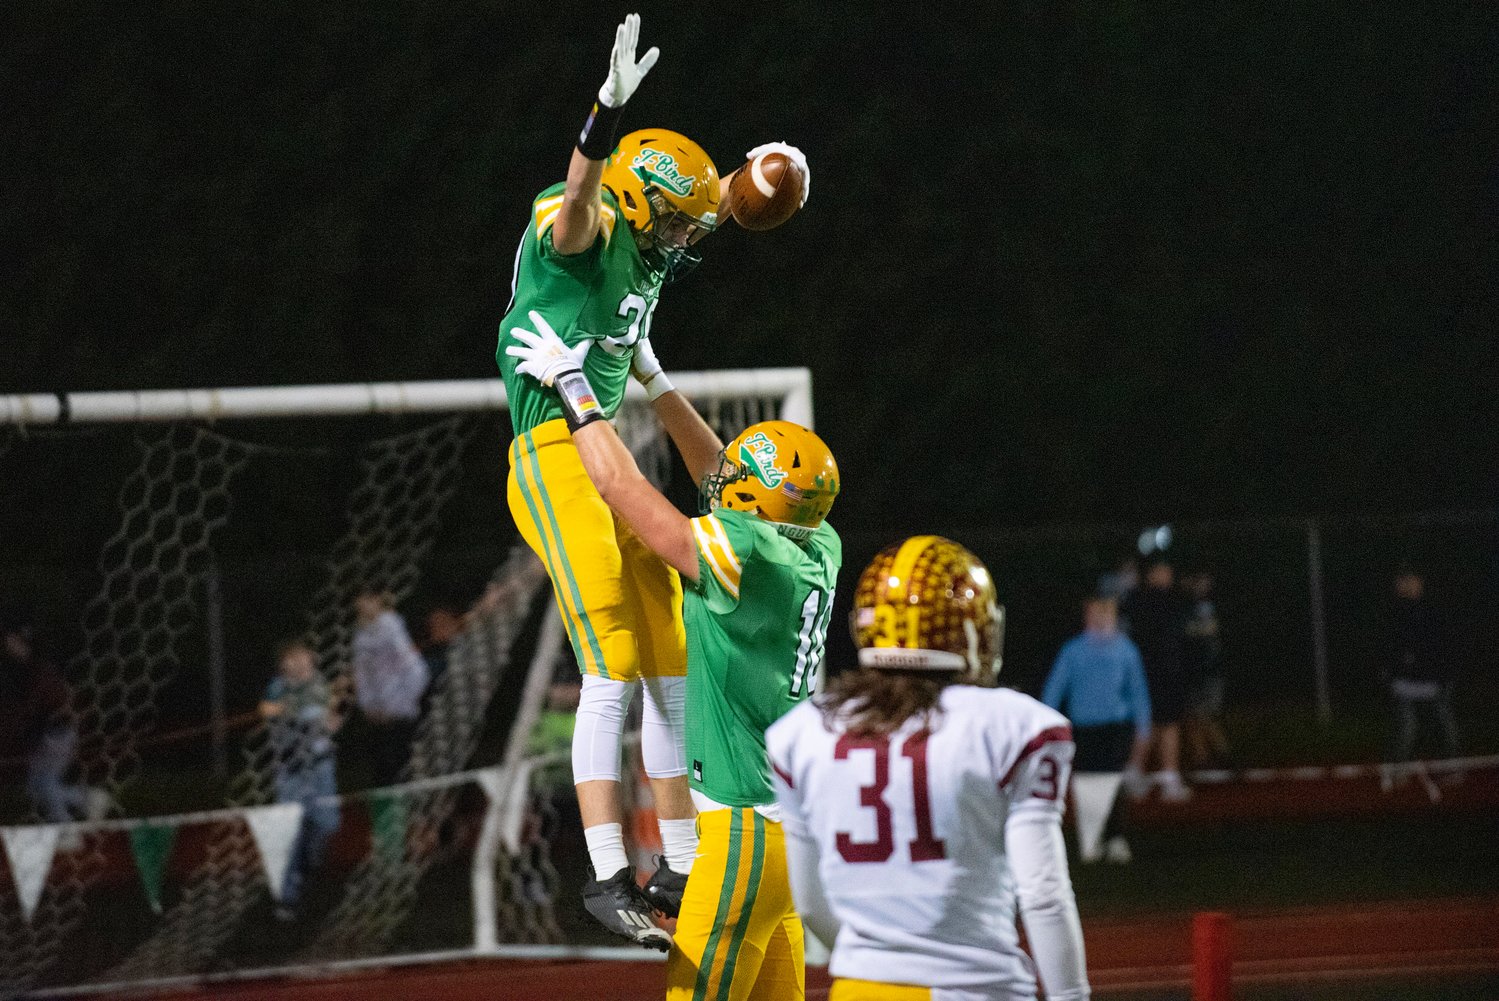 Tumwater’s Ryan Otton (10) lifts Seth Weller (20) into the air after Weller scores a receiving touchdown against Enumclaw in the 2A state quarterfinals Nov. 19 at Tumwater District Stadium.